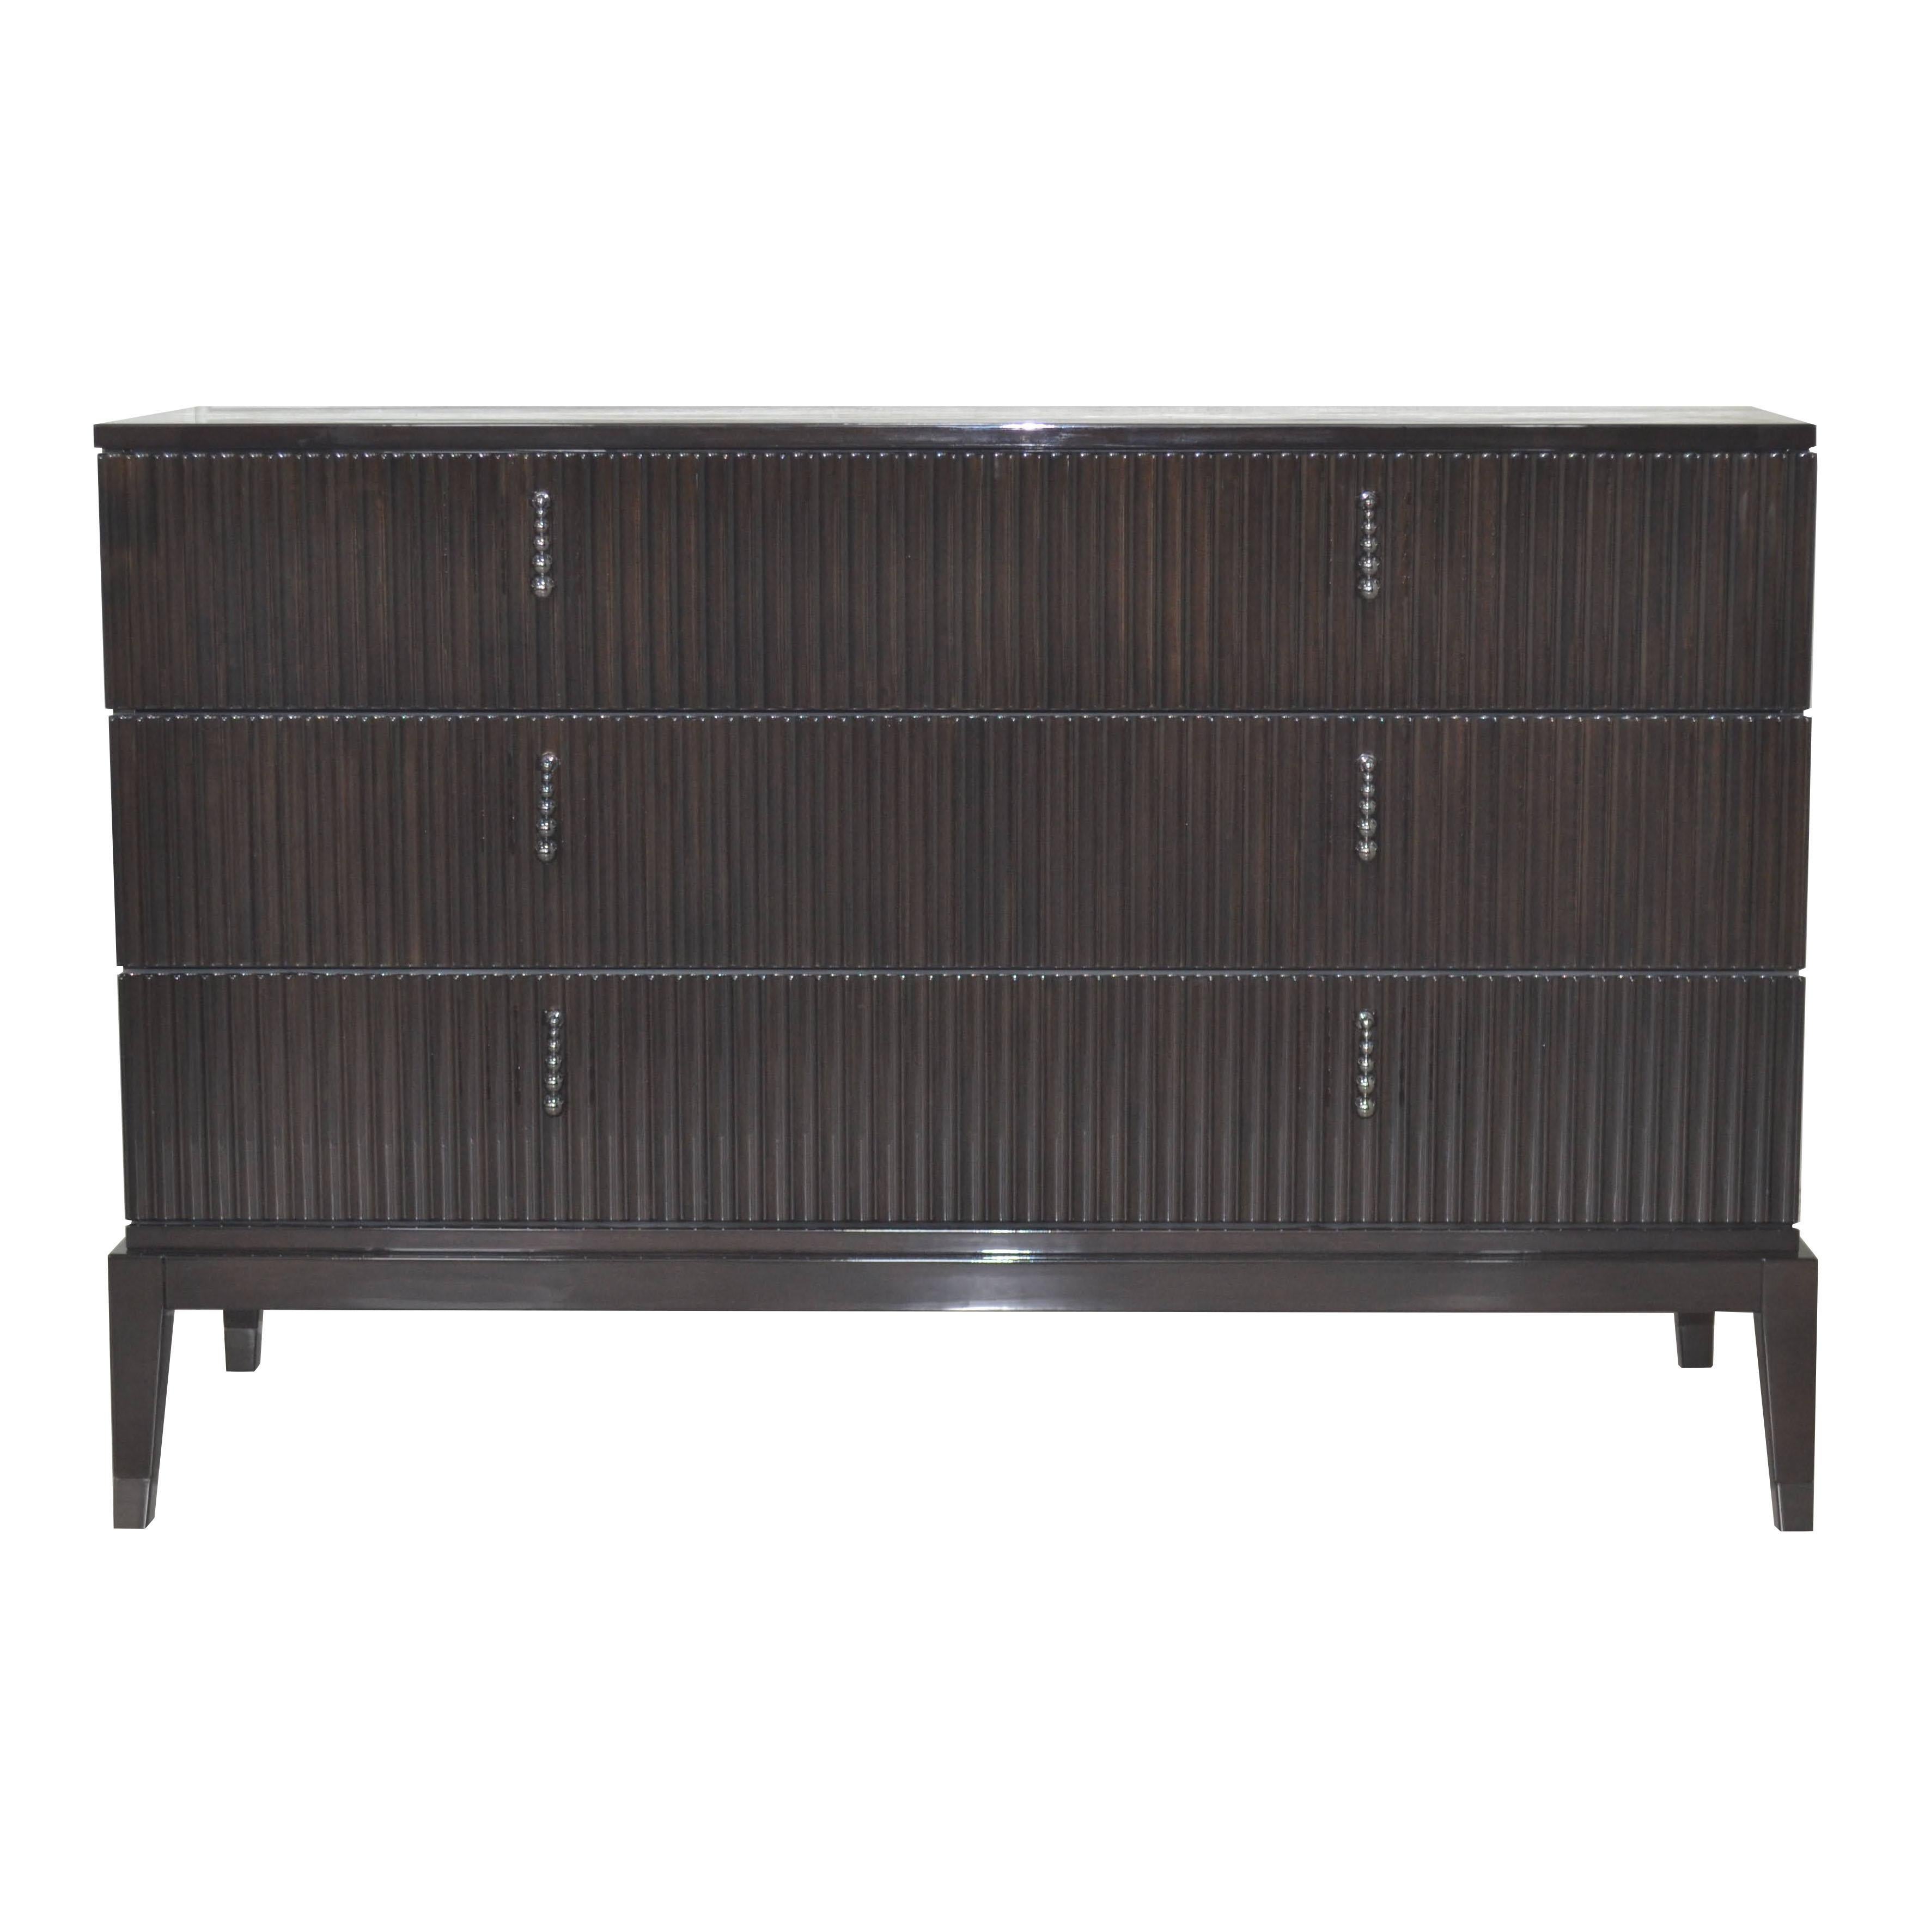 Rich in storage potential, this large chest of drawers exudes Art Deco glamour with its linear design and high-gloss finishes. The drawers are upholstered inside with brown eco-friendly faux leather / vegan nubuck.